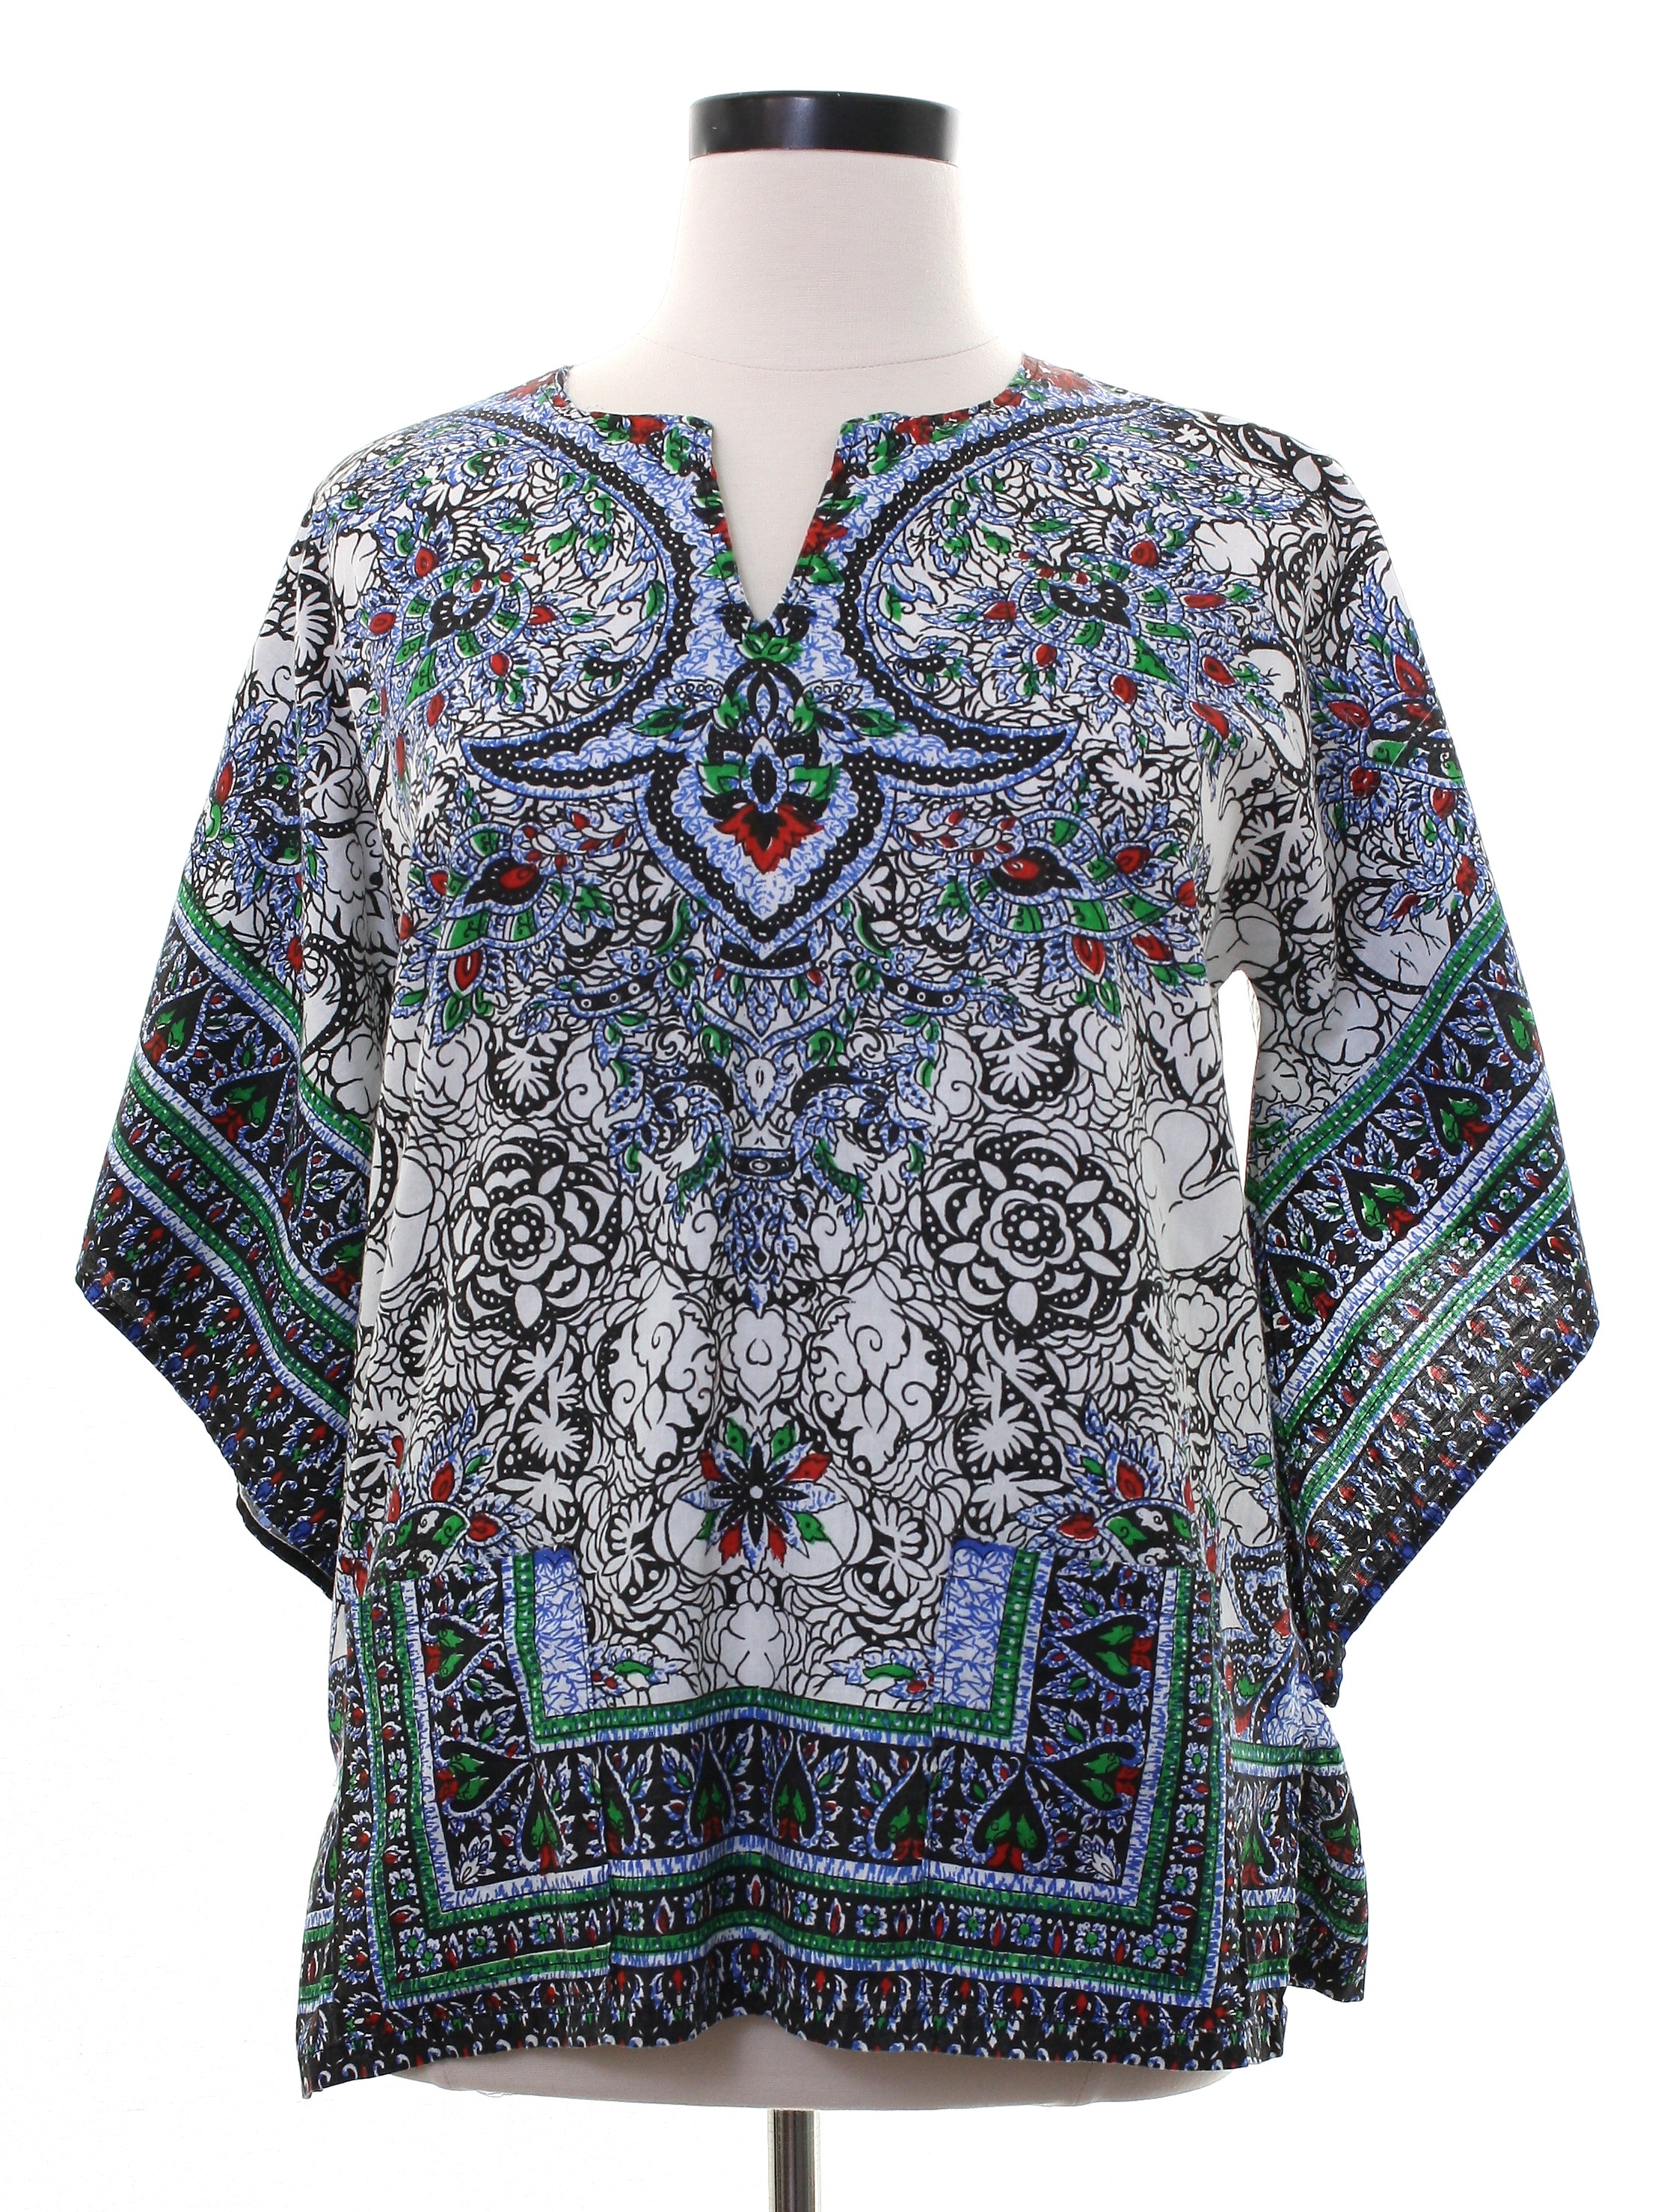 Seventies Vintage Hippie Shirt: 70s style (made in 90s) -Kaiser- Womens ...